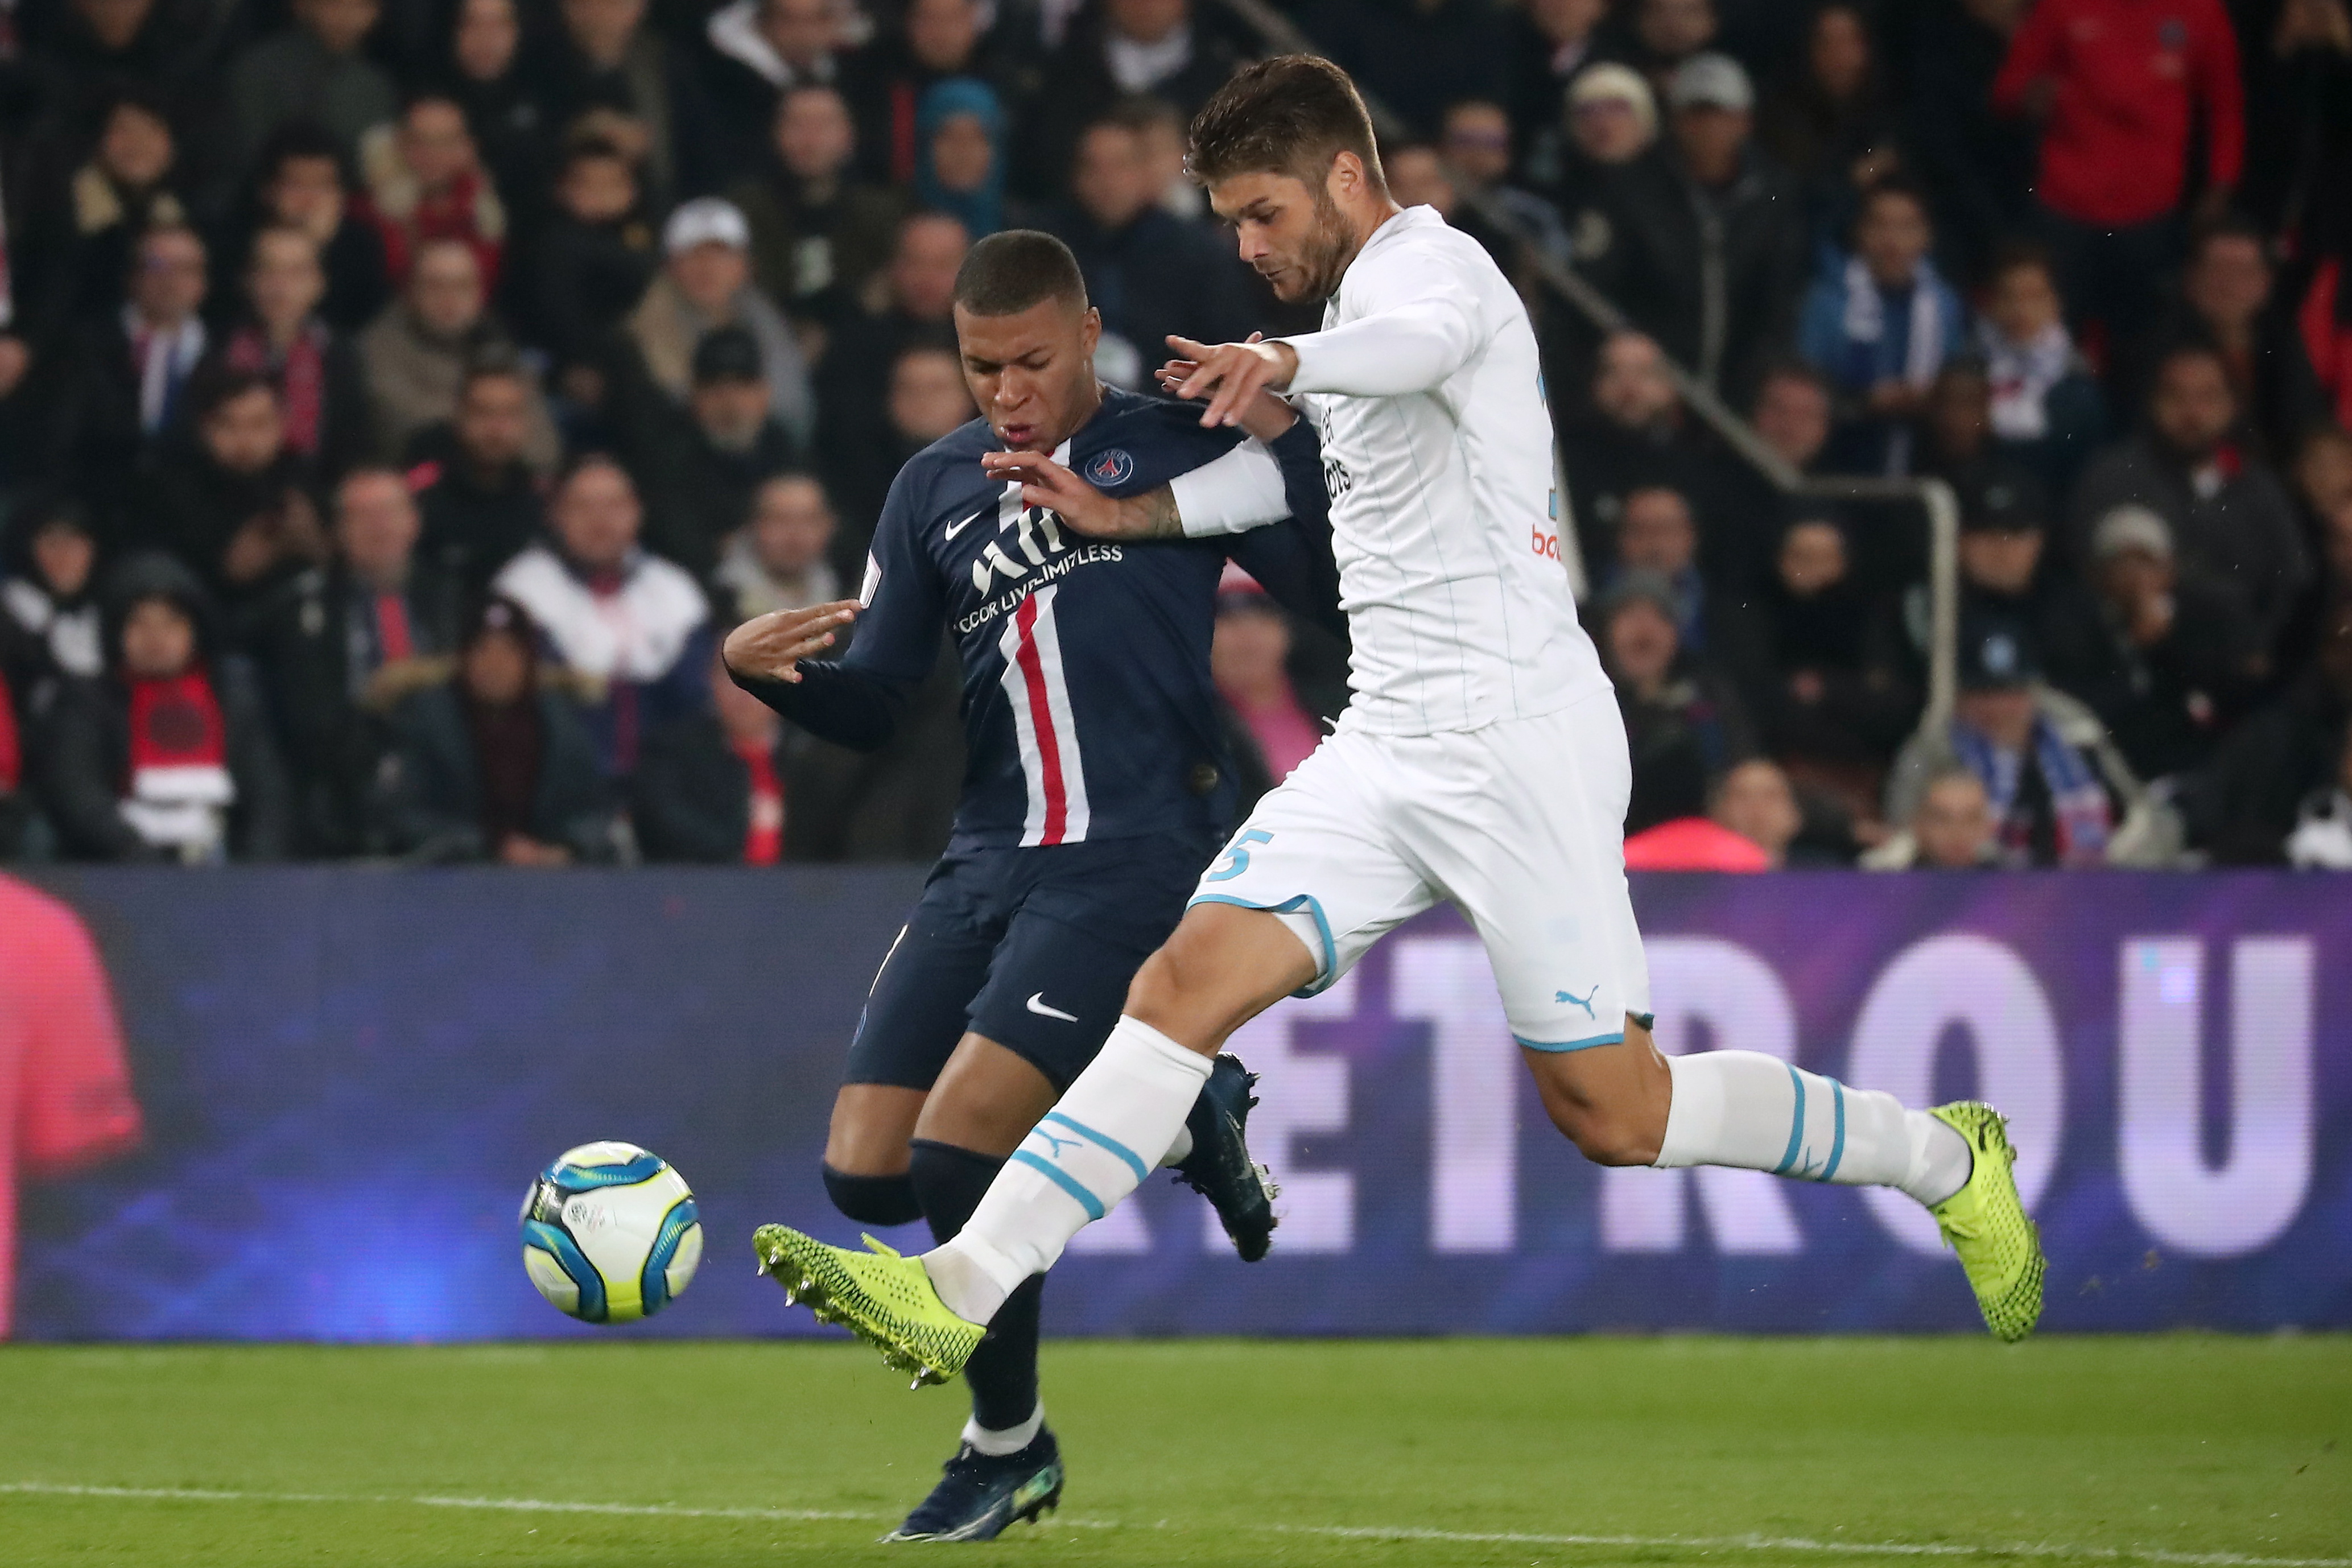 epa07954814 Paris Saint Germain's Kylian Mbappe (L) and Marseille's Duje Caleta-Car (R) in action during the French Ligue 1 soccer match between PSG and Marseille at the Parc des Princes stadium in Paris, France, 27 October 2019.  EPA/CHRISTOPHE PETIT TESSON